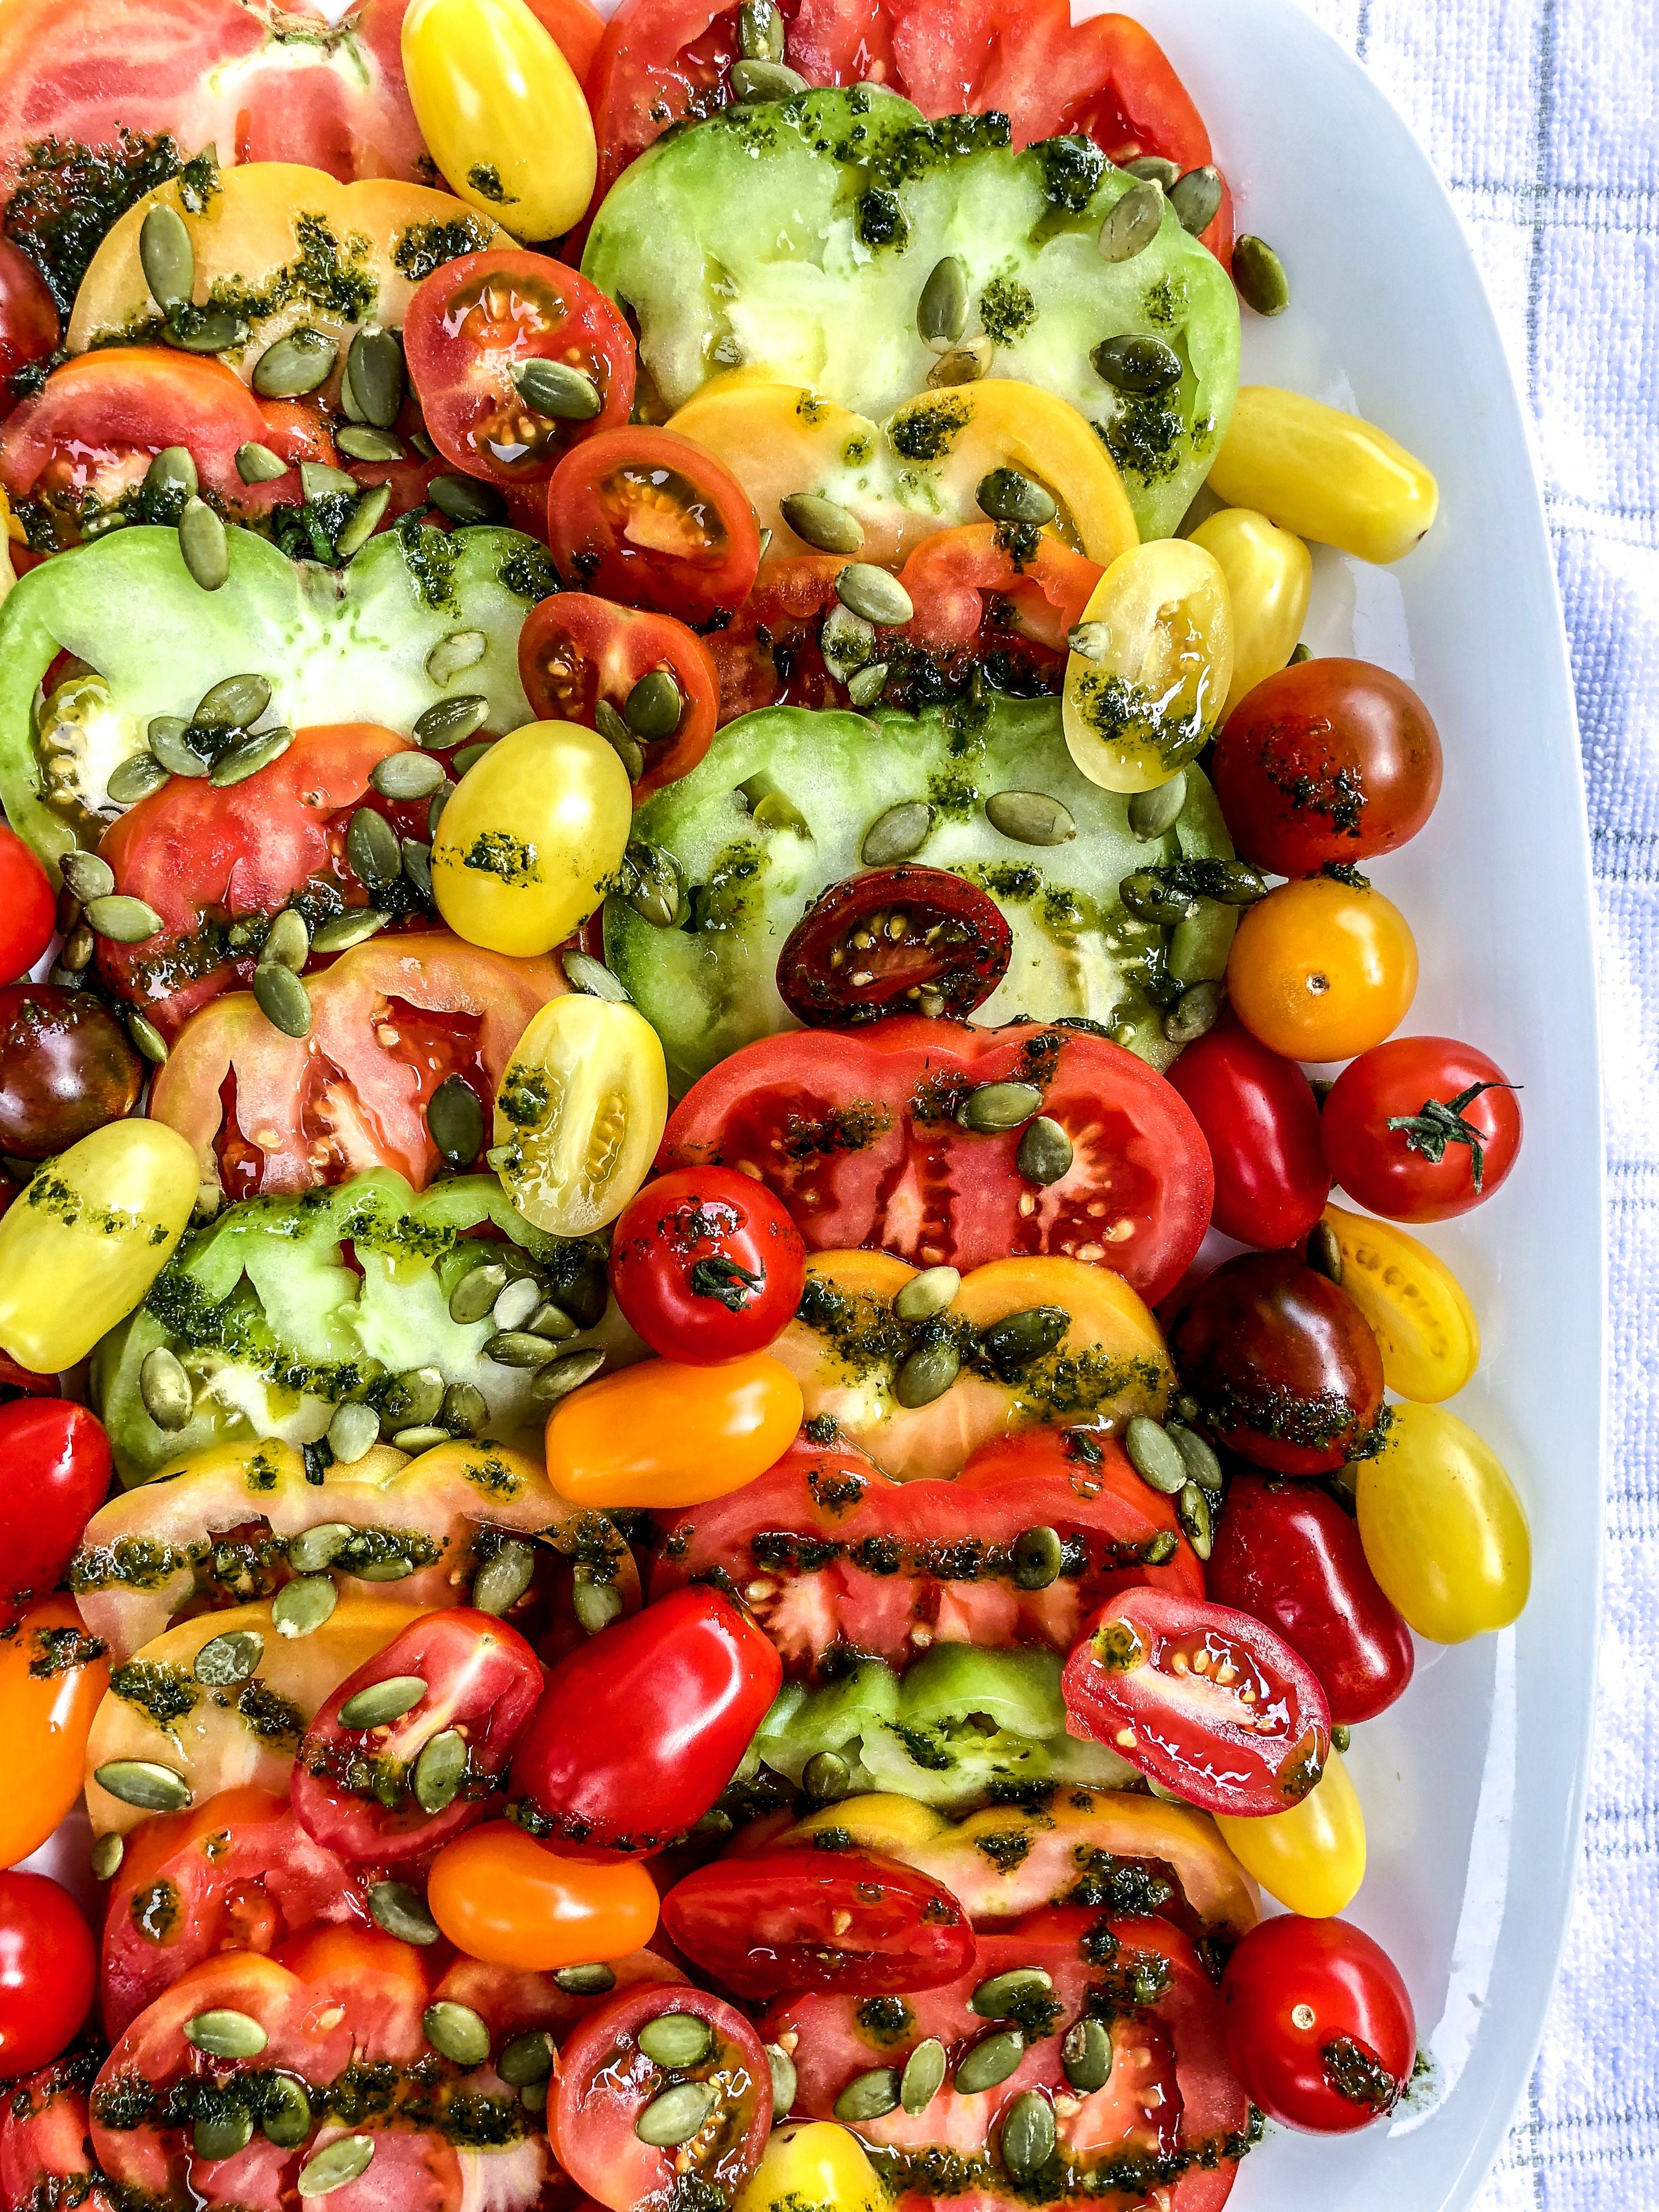 Heirloom Tomato Platter with Herb Oil from Food & Drink 25th Anniversary Issue